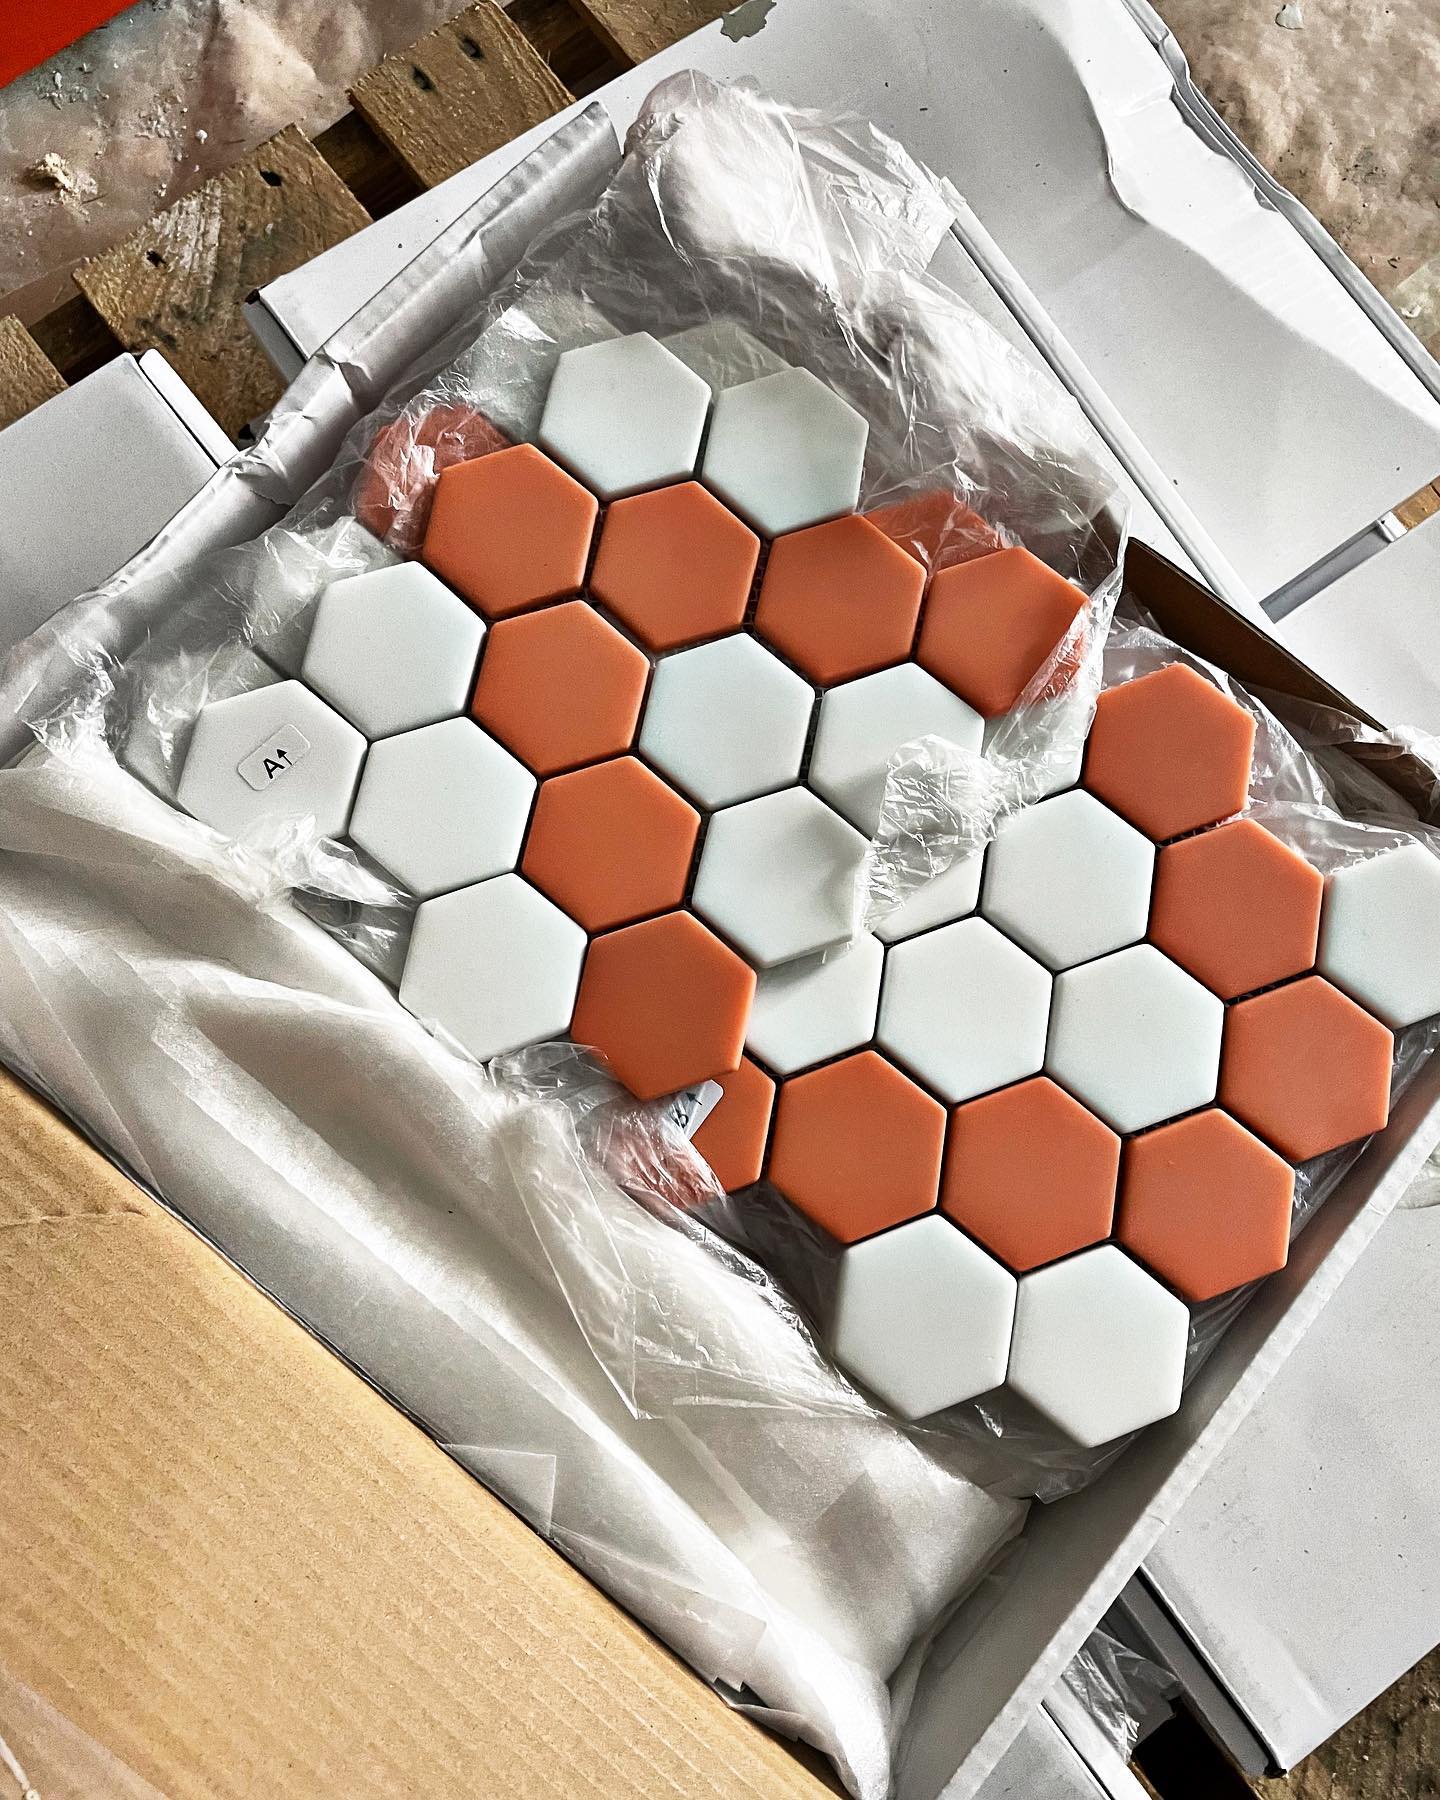 Tile that looks like home-jewelry  can’t wait to see this up! @annsacks whitefish custom home builder